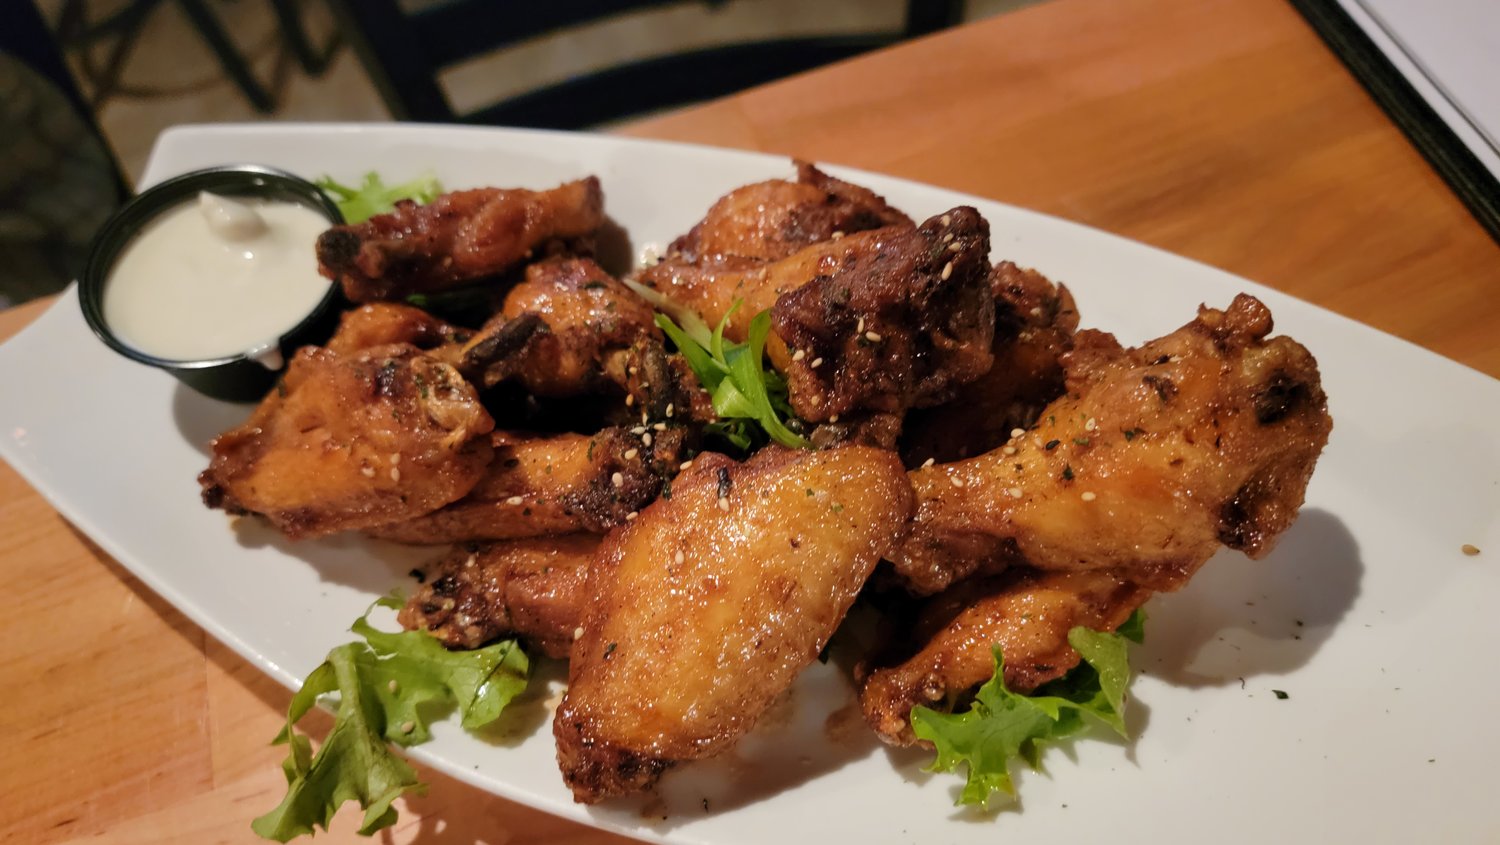 The chicken wings are available in a number of different varieties, including traditional Buffalo and Korean barbecue, above.